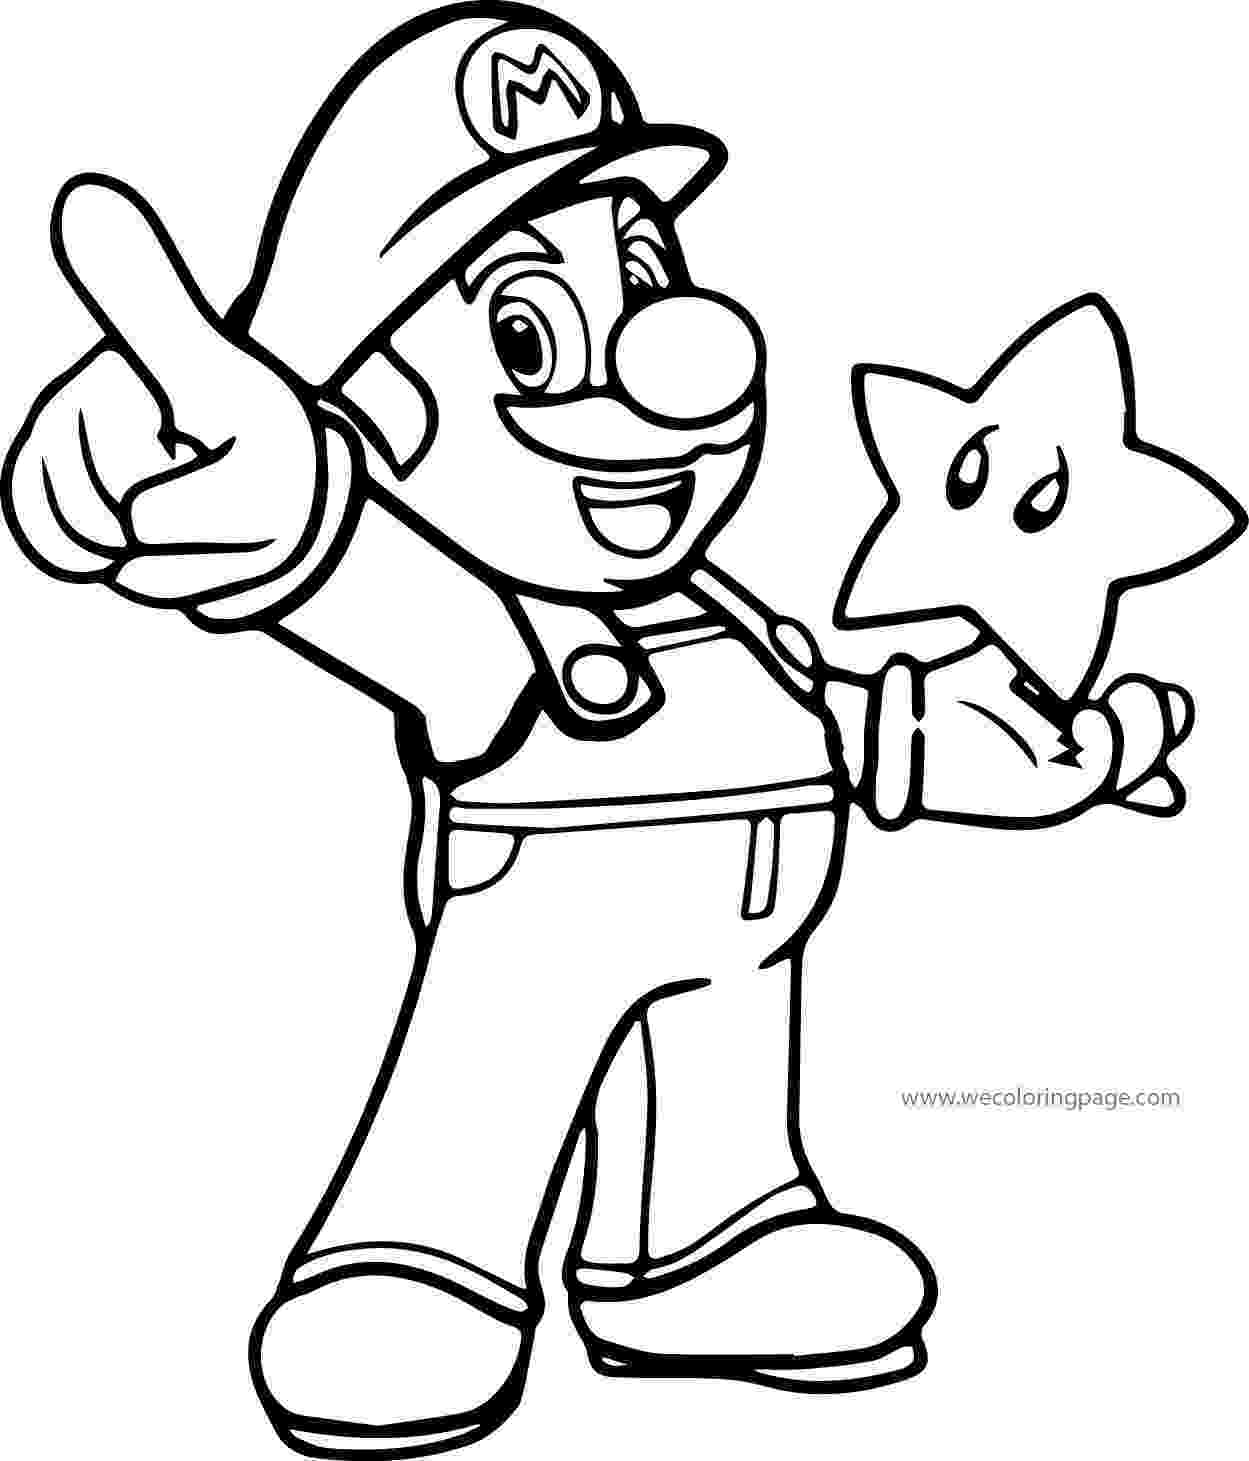 mario pictures google image result for httpwwwcoloringshapescomwp mario pictures 